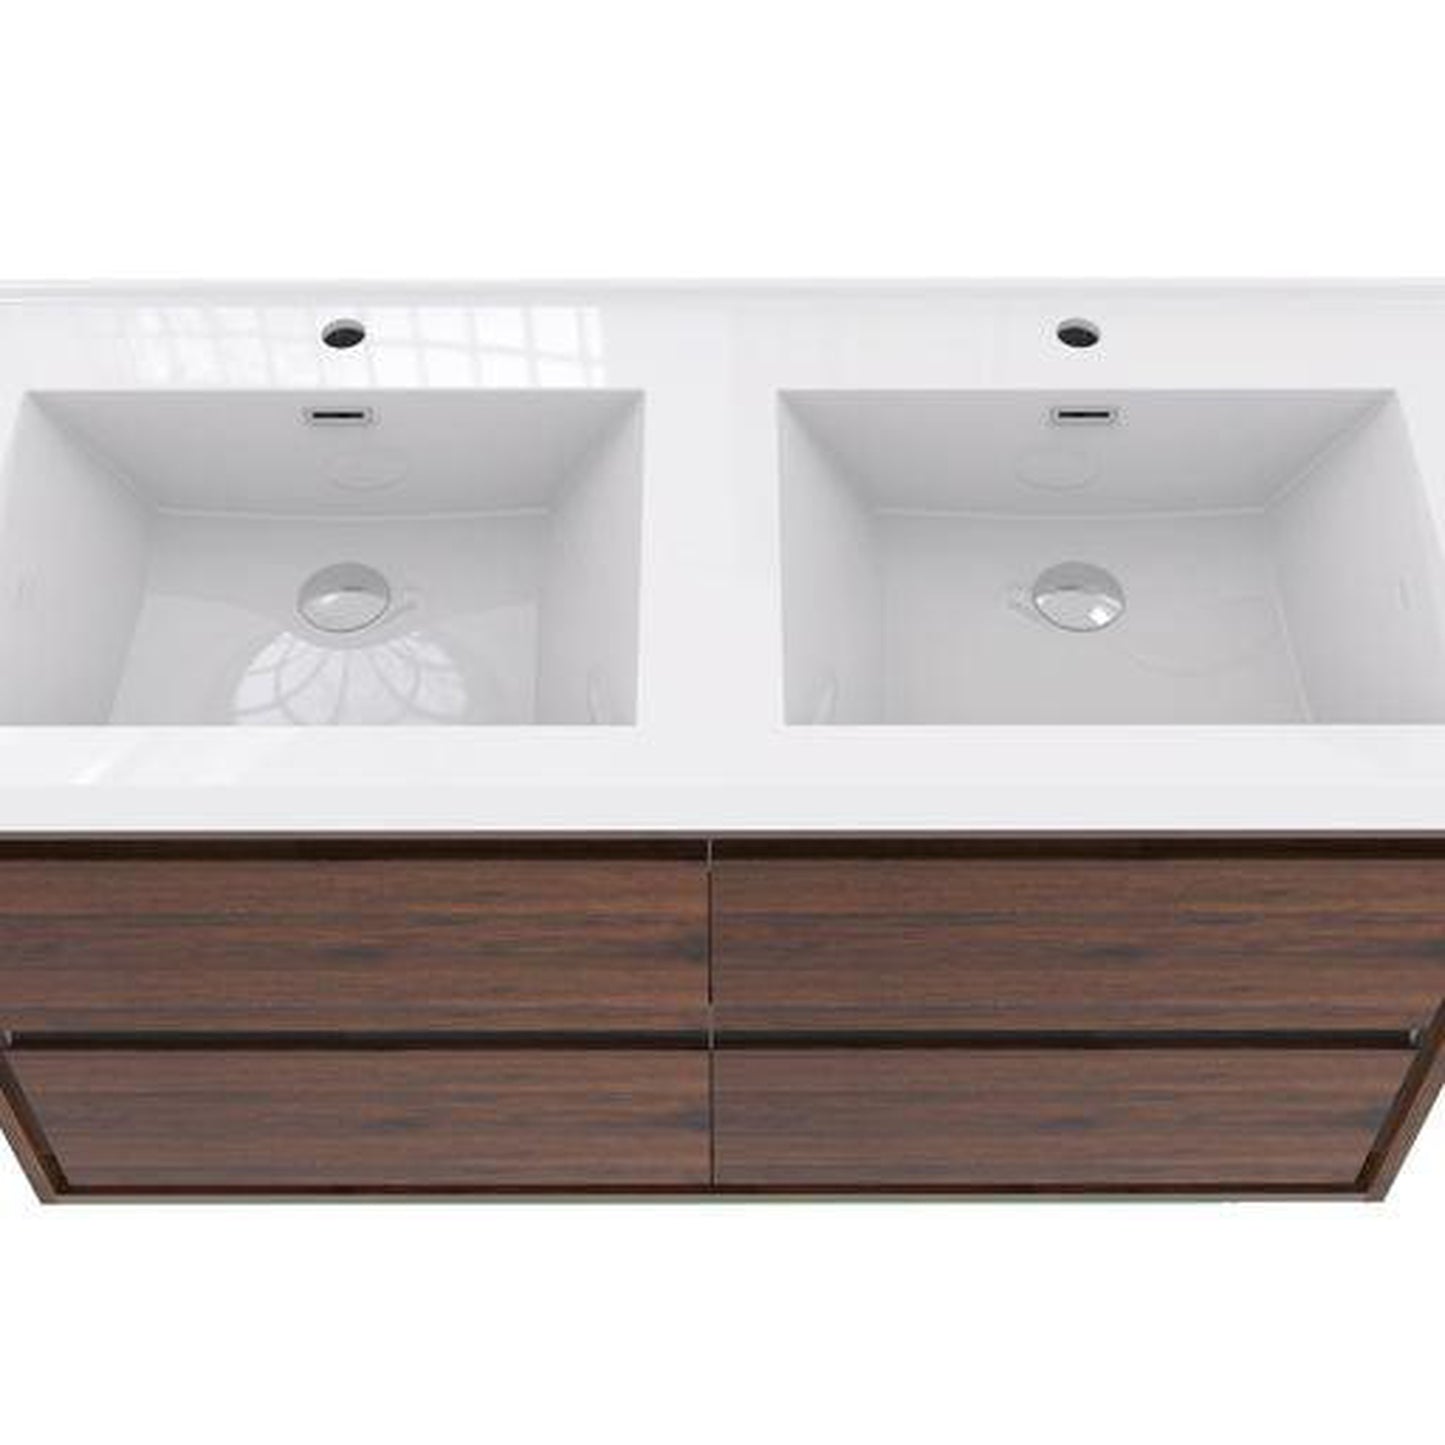 Moreno Bath Sage 60" Rosewood Wall-Mounted Modern Vanity With Double Reinforced White Acrylic Sinks